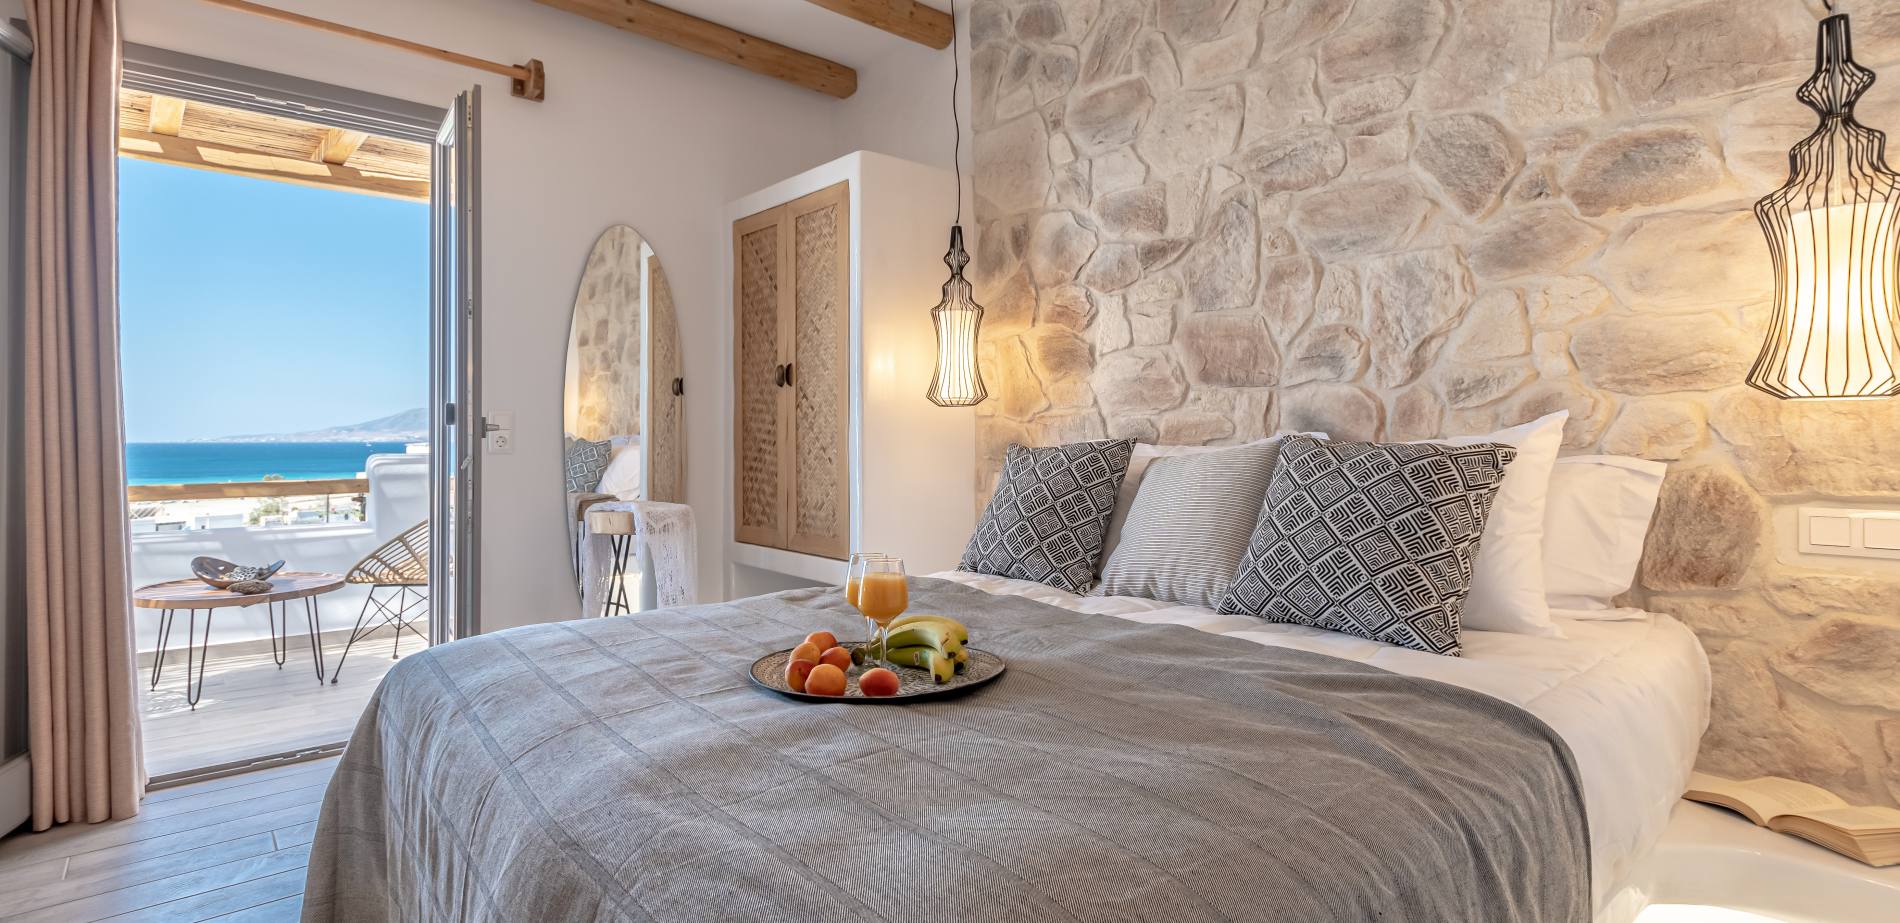 Naxos Contelibro Suites and Rooms